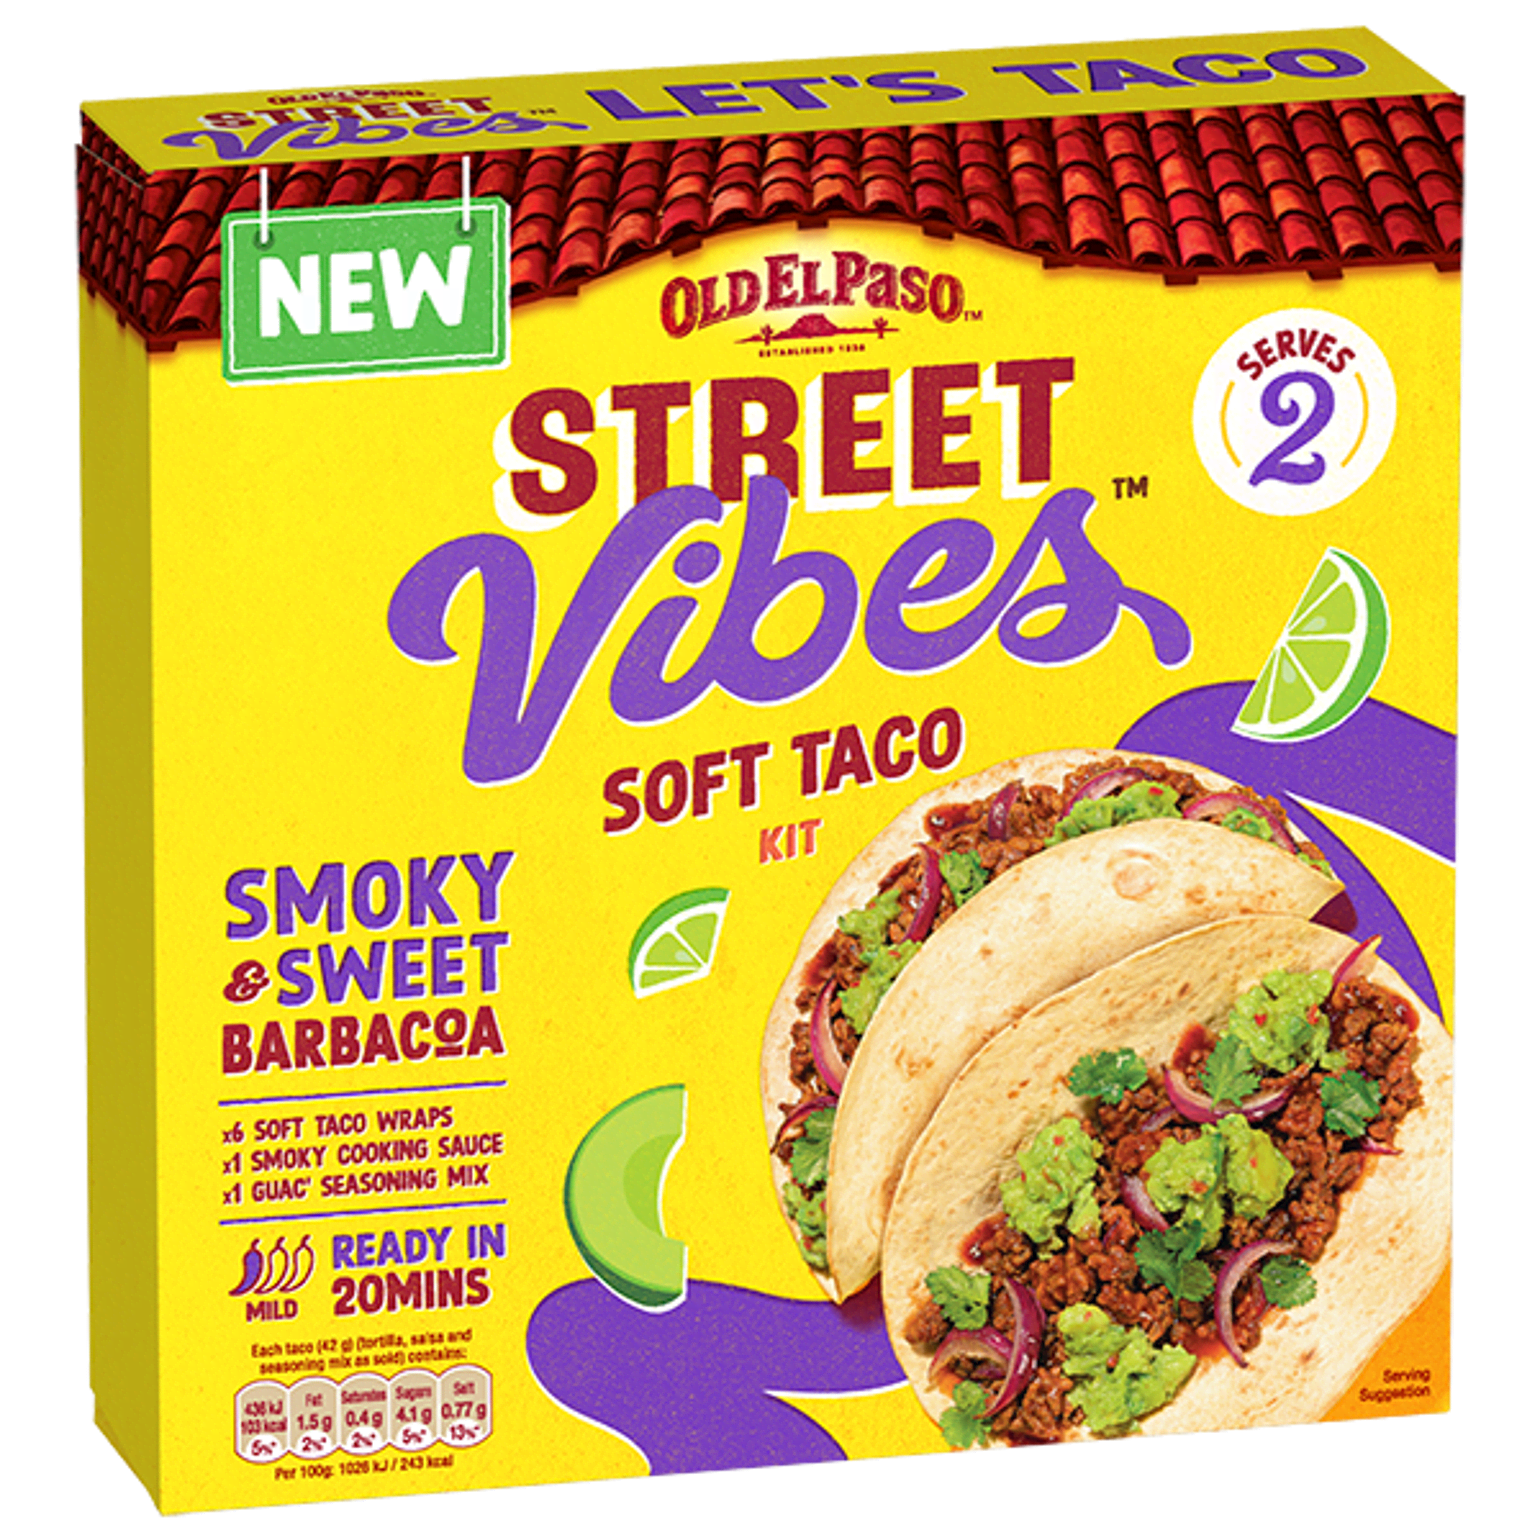 A pack of Old El Paso Street Vibes Barbacoa Soft Taco Kit 255g